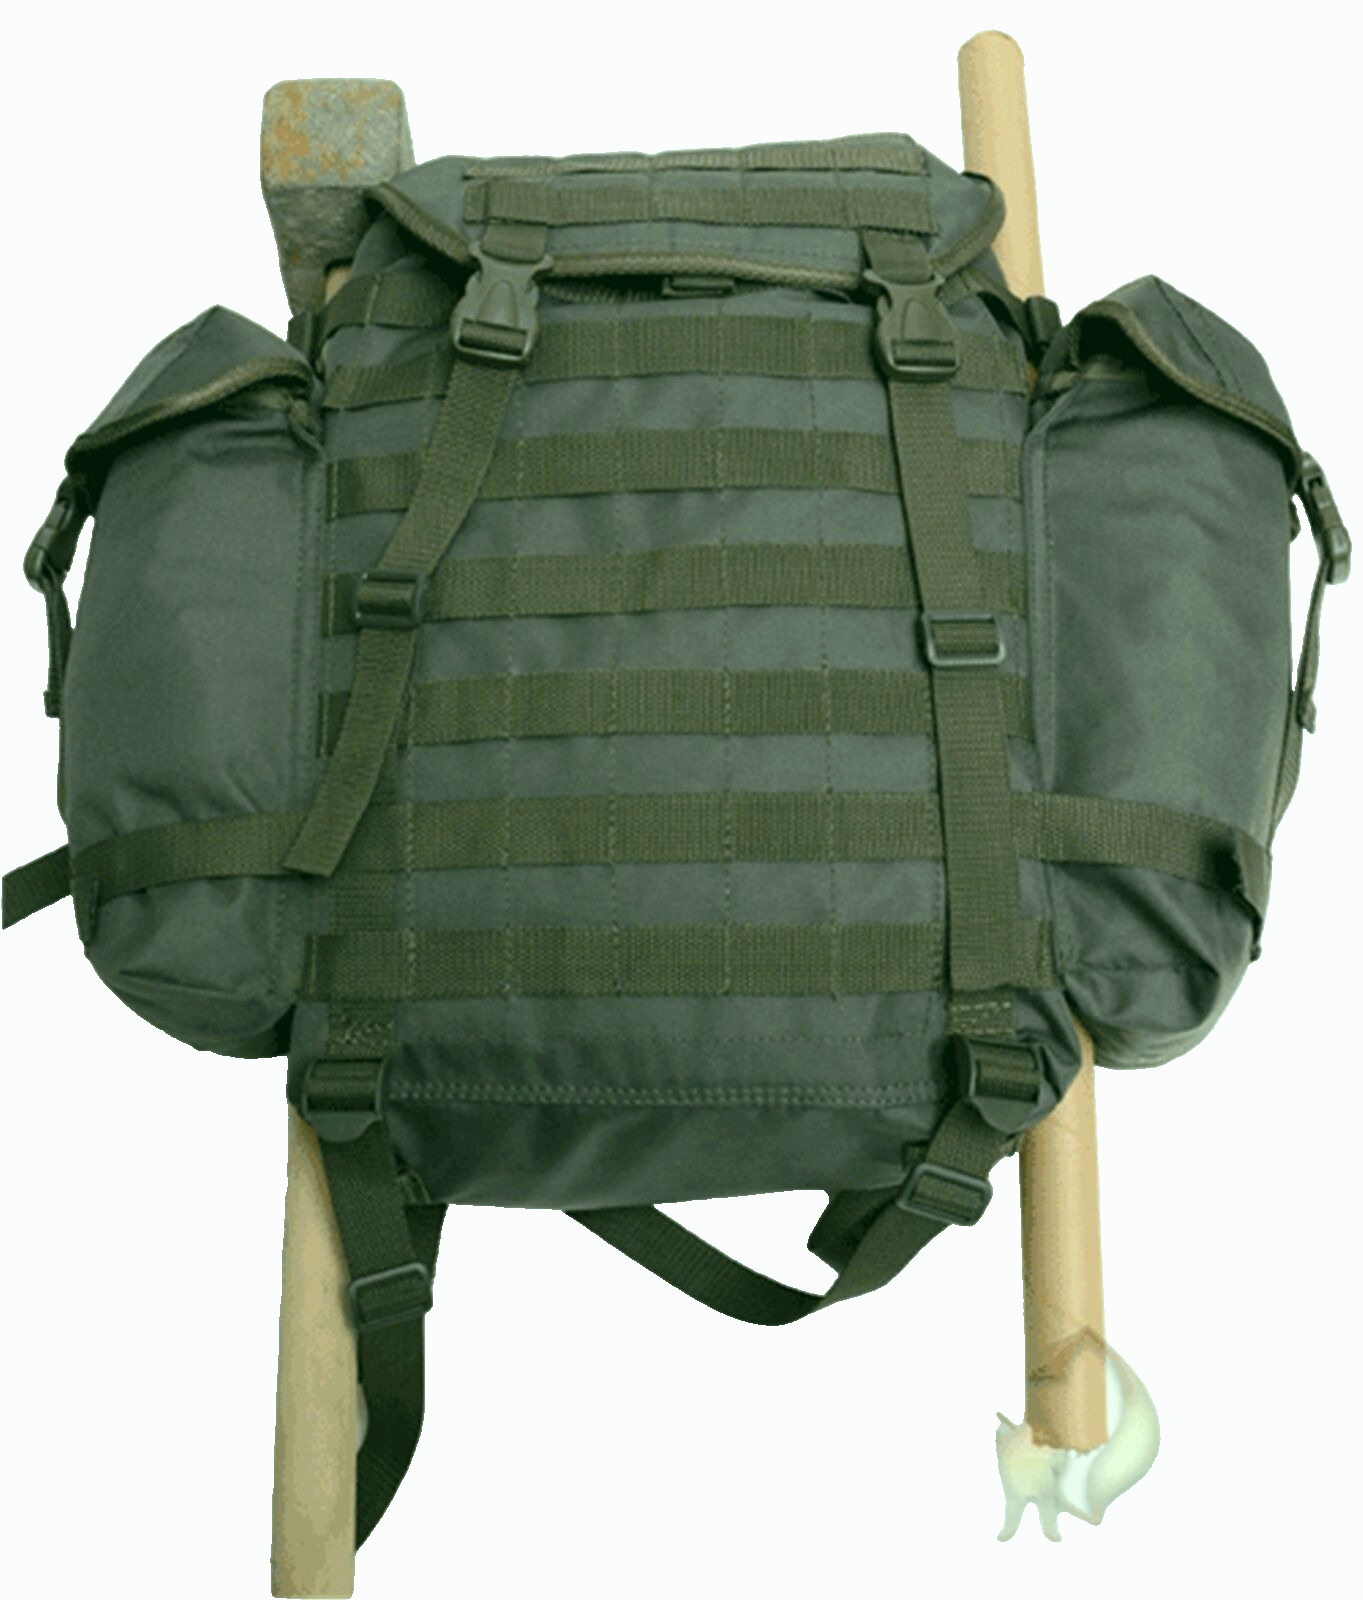 Russian Military Tactical GRANIT 25L Army MOLLE Patrol Backpack Olive by Sotnic